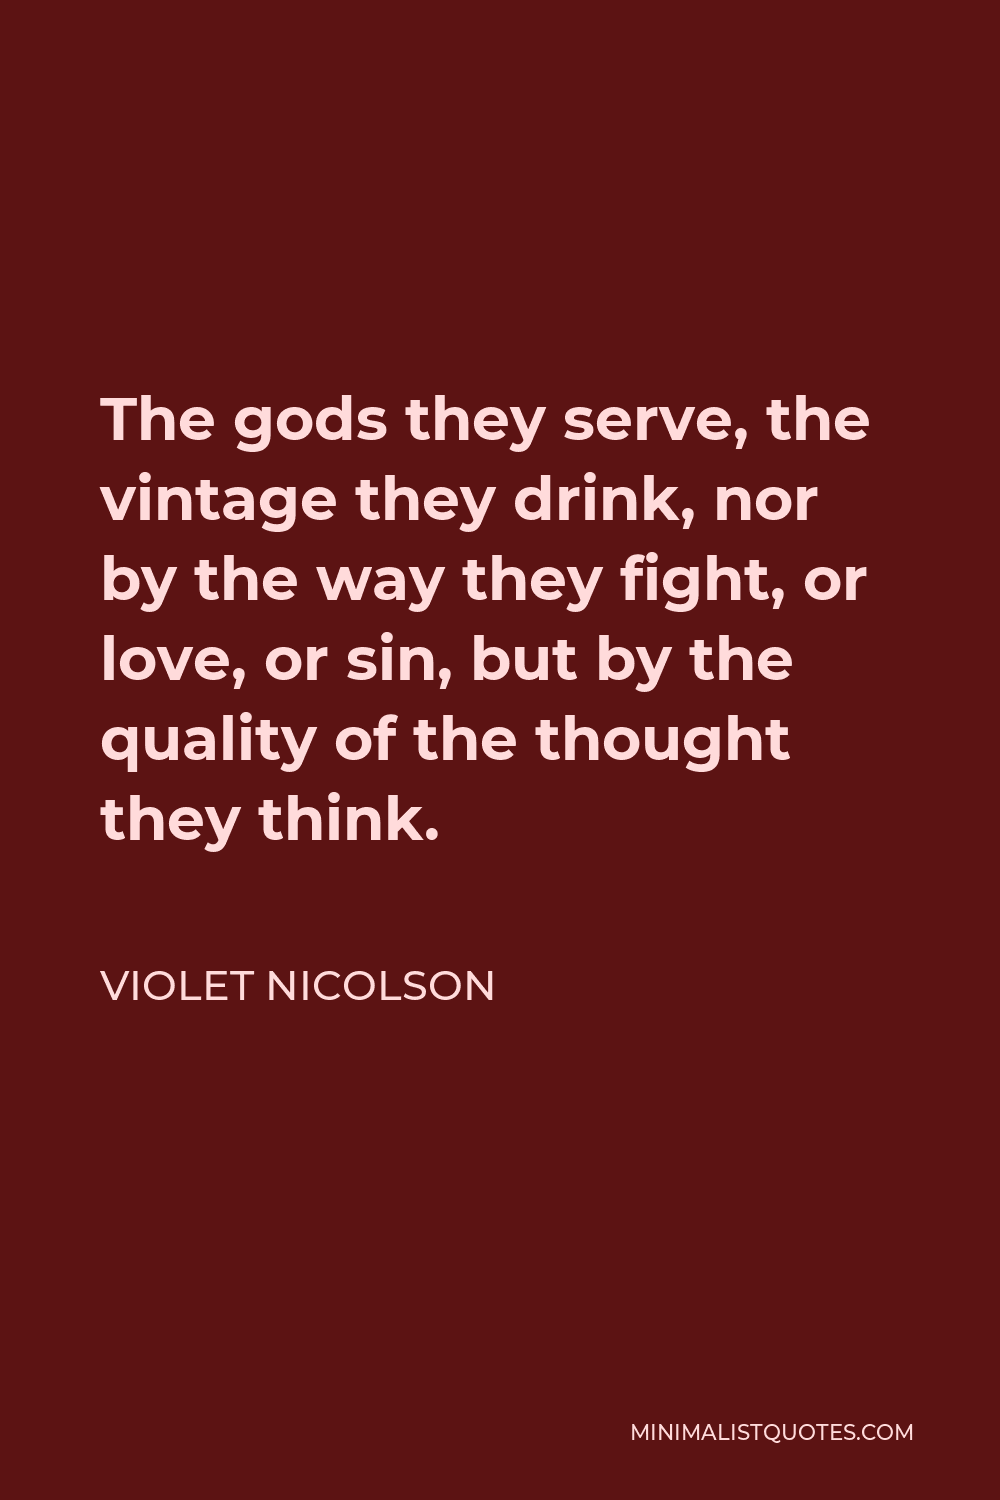 Violet Nicolson Quote - The gods they serve, the vintage they drink, nor by the way they fight, or love, or sin, but by the quality of the thought they think.